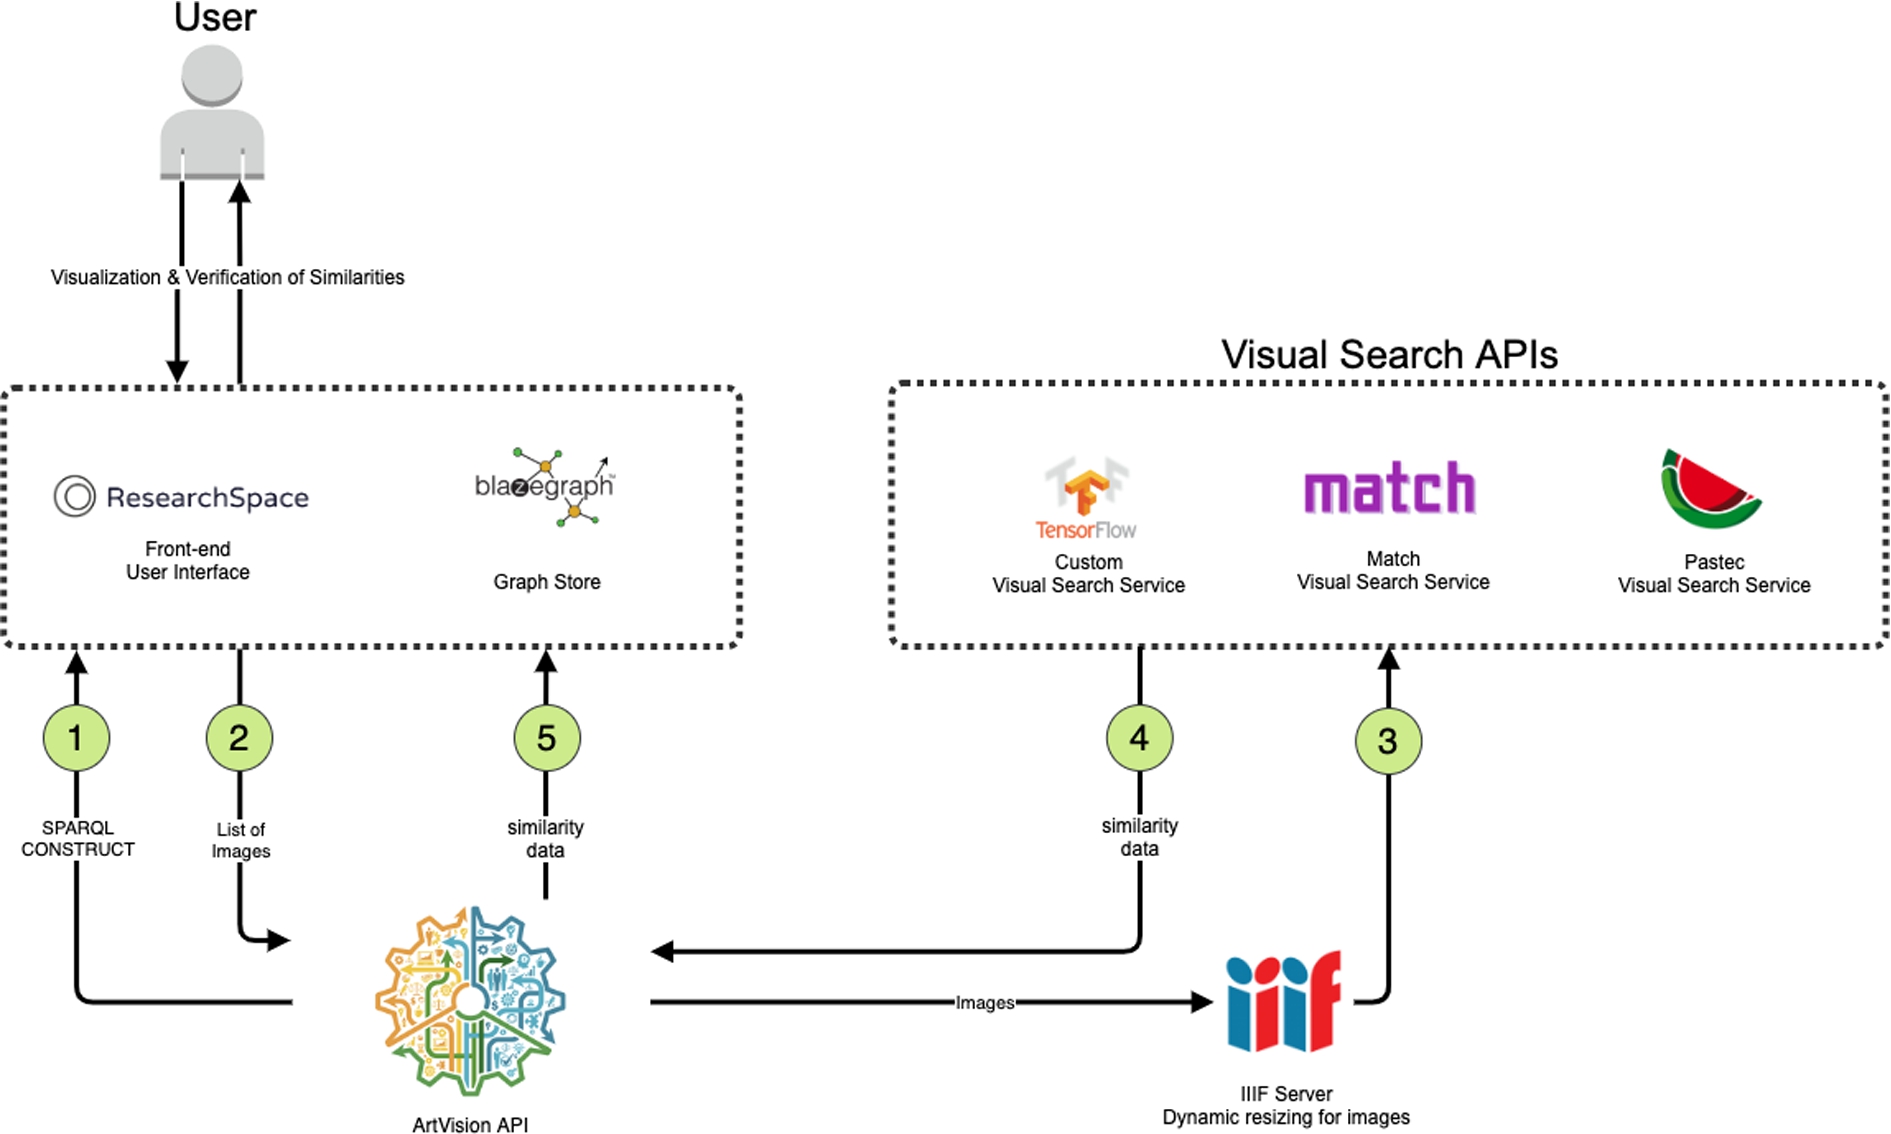 Software architecture for the ArtVision API.